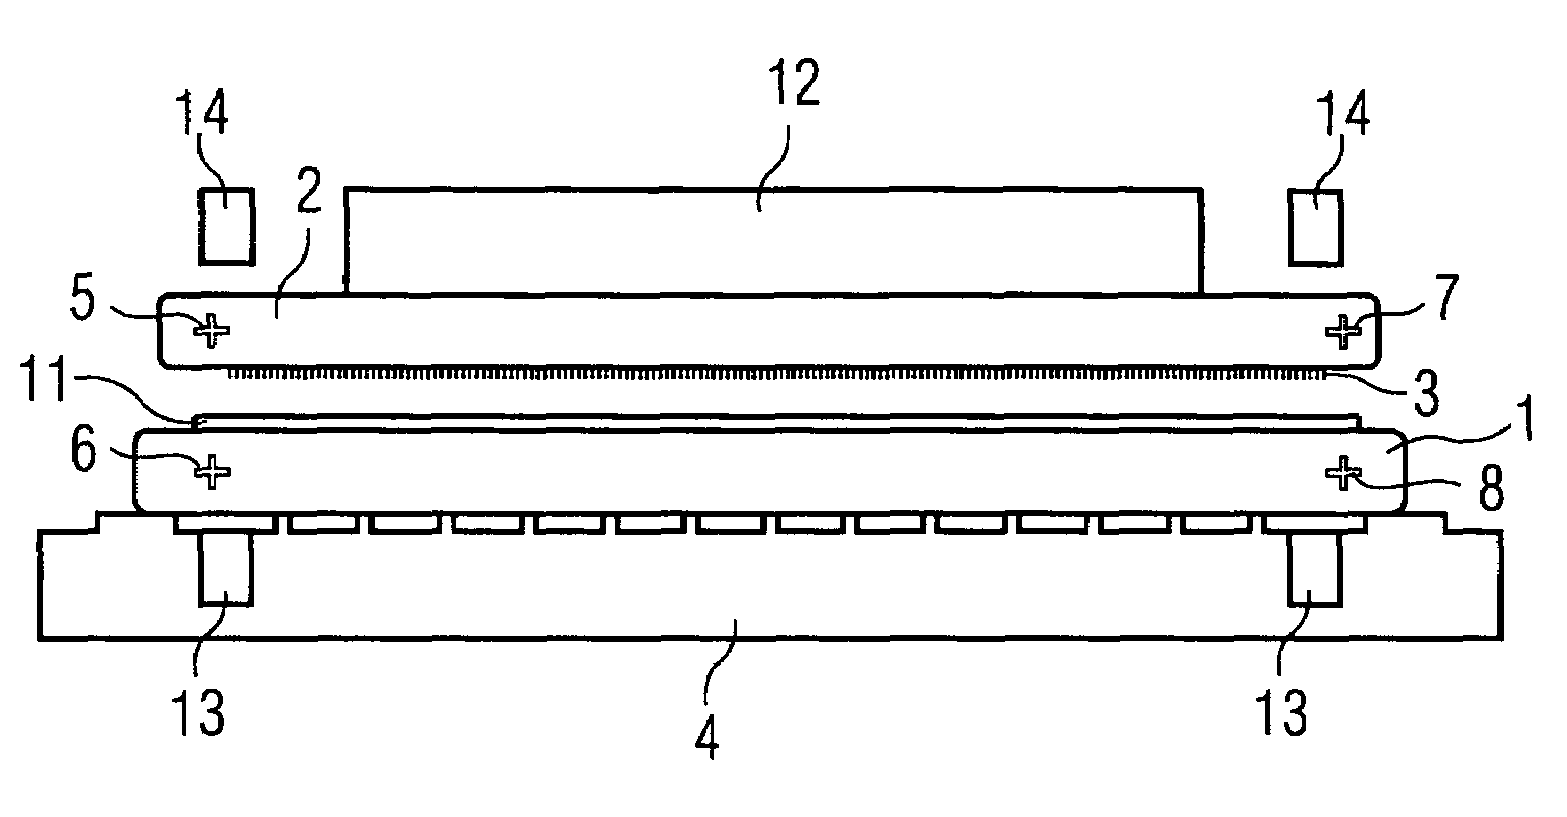 Arrangement for transferring information/structures to wafers